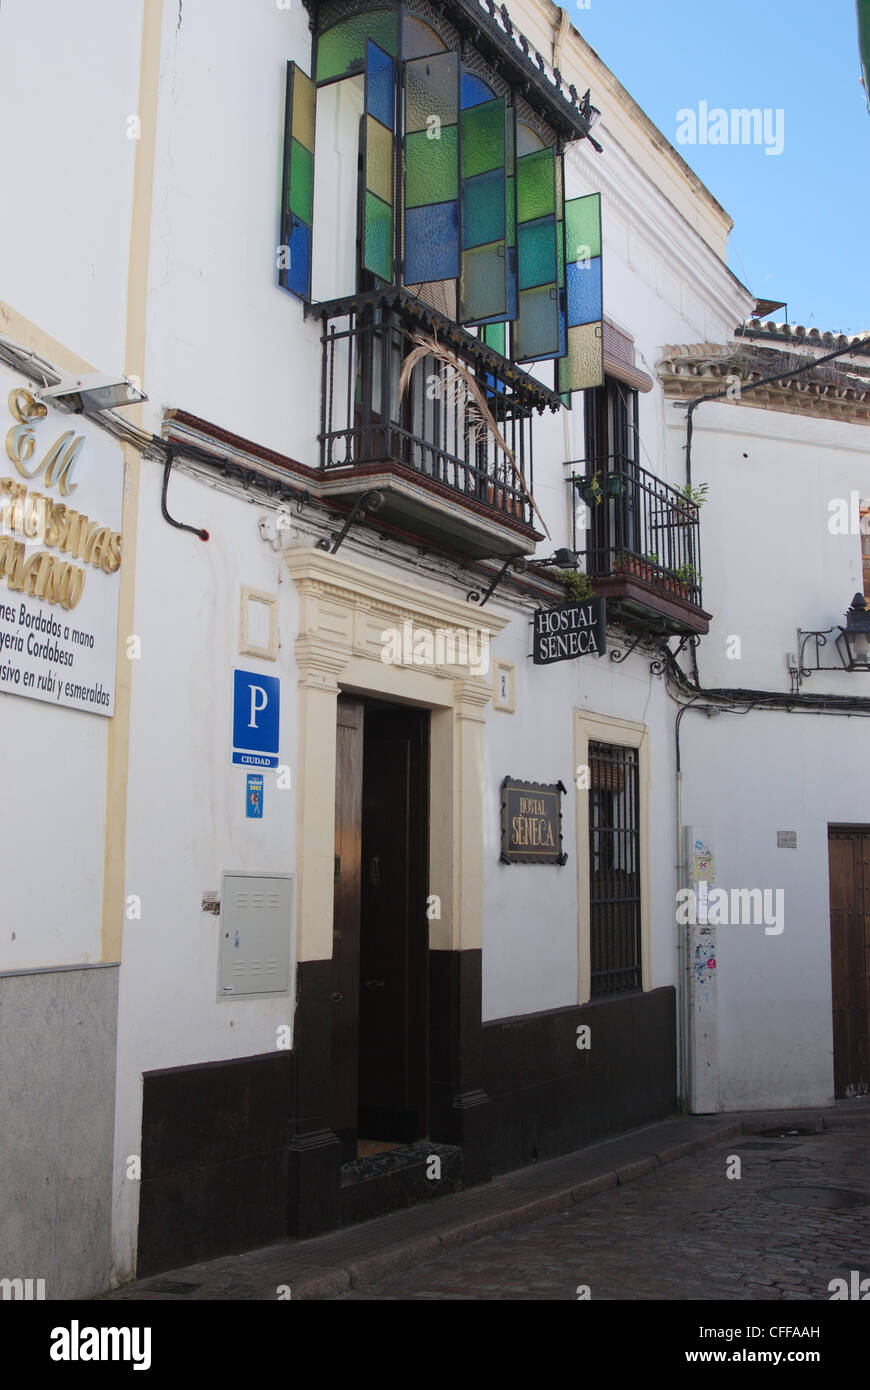 Hostal (budget hotel) in the old town, Cordoba, Cordoba Province, Andalucia, Spain, Western Europe. Stock Photo